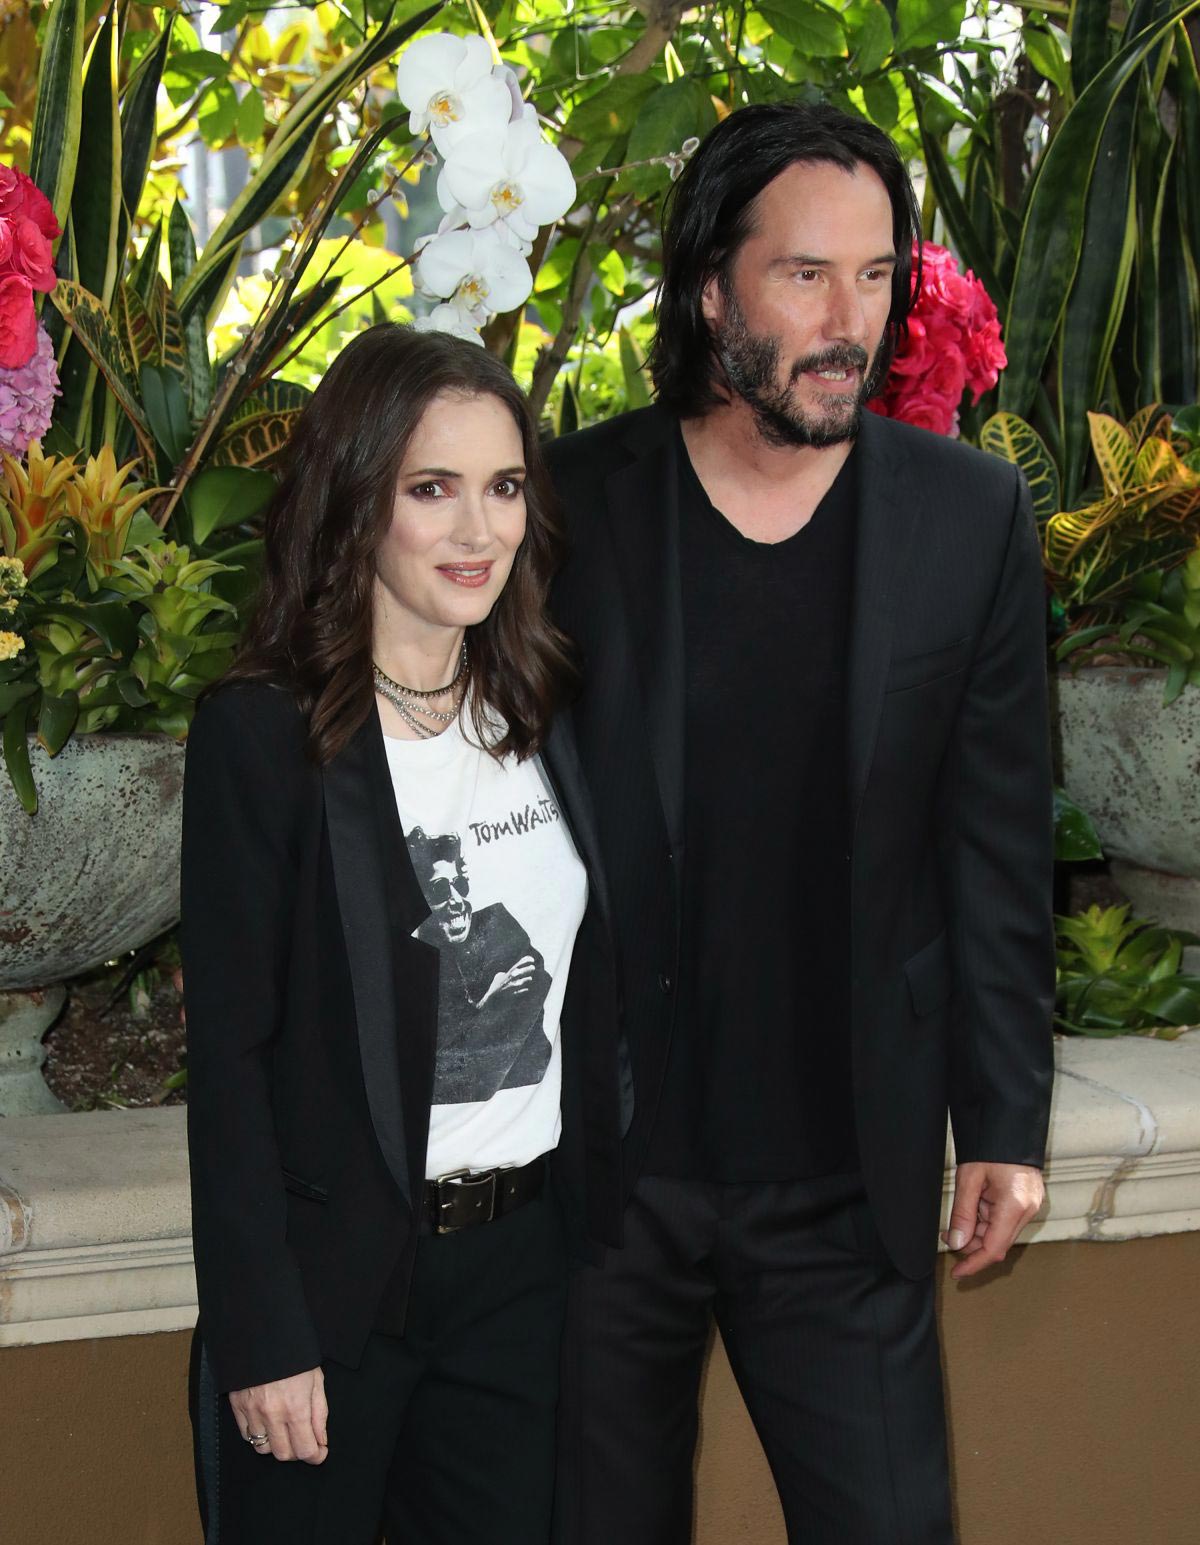 Winona Ryder and Keanu Reeves at Destination Wedding Photocall in Beverly Hills 2018/08/18